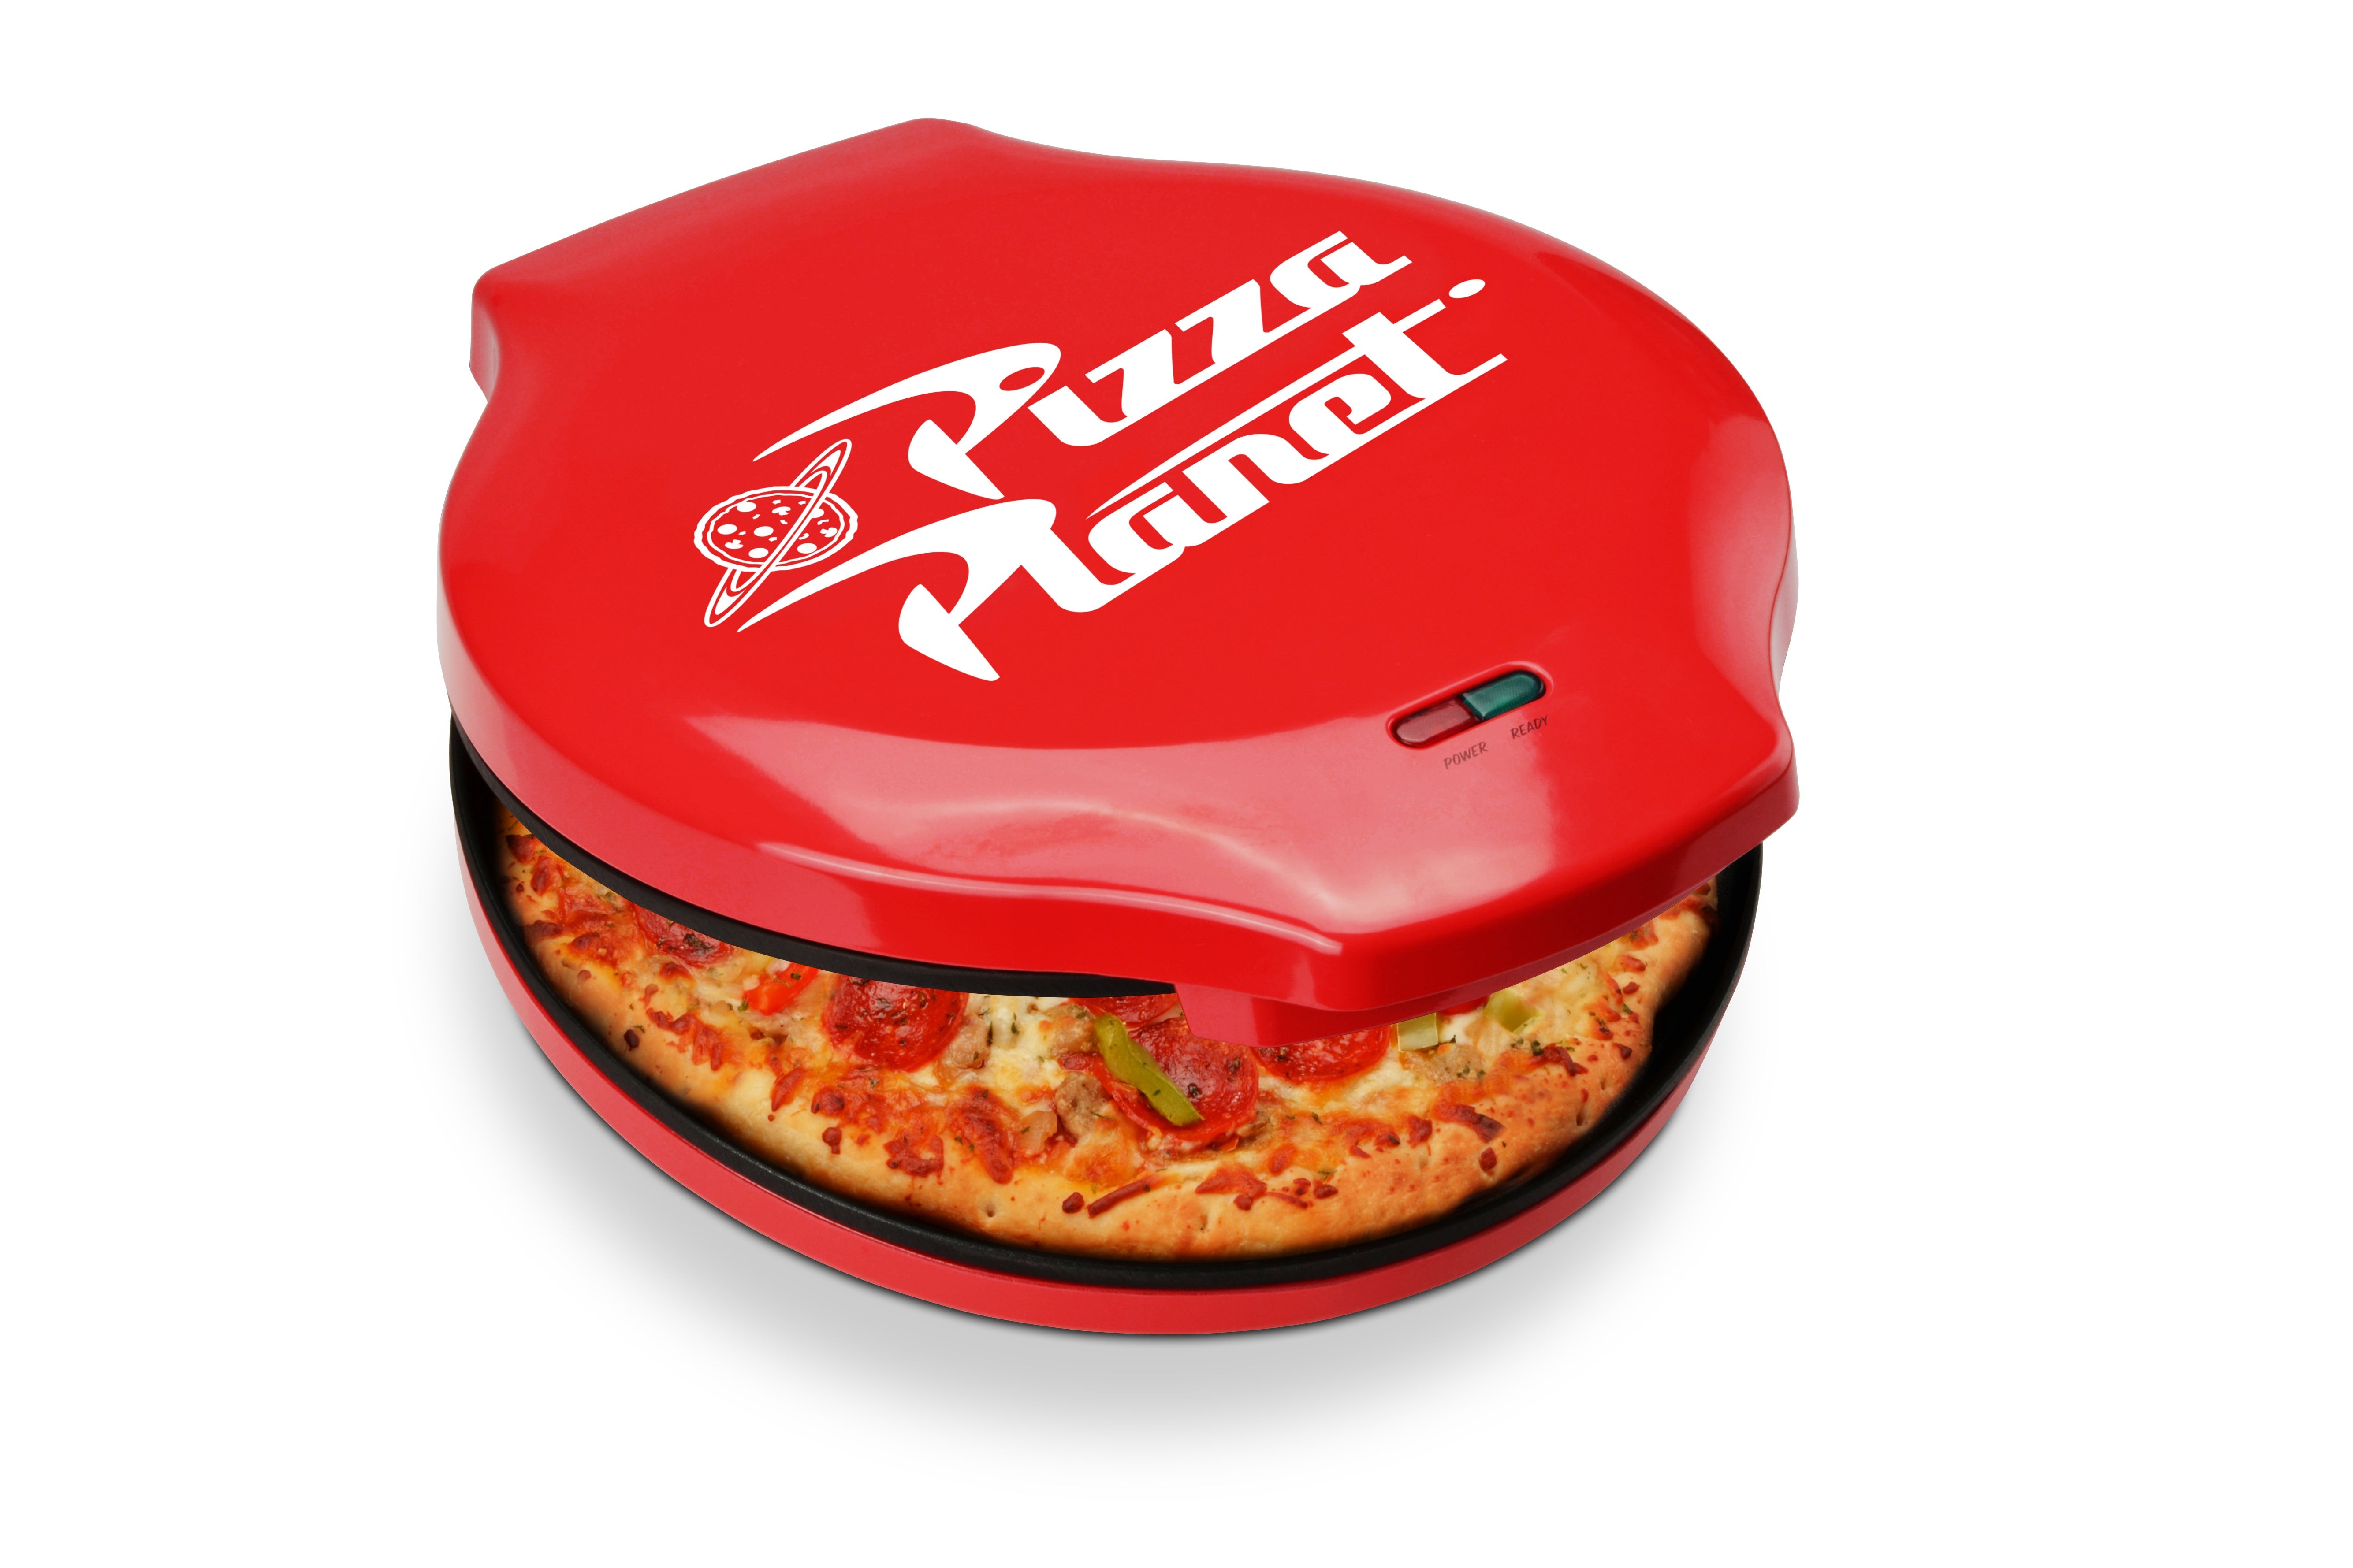 Pixar Toy Story Pizza Planet 12" Electric Pizza Maker